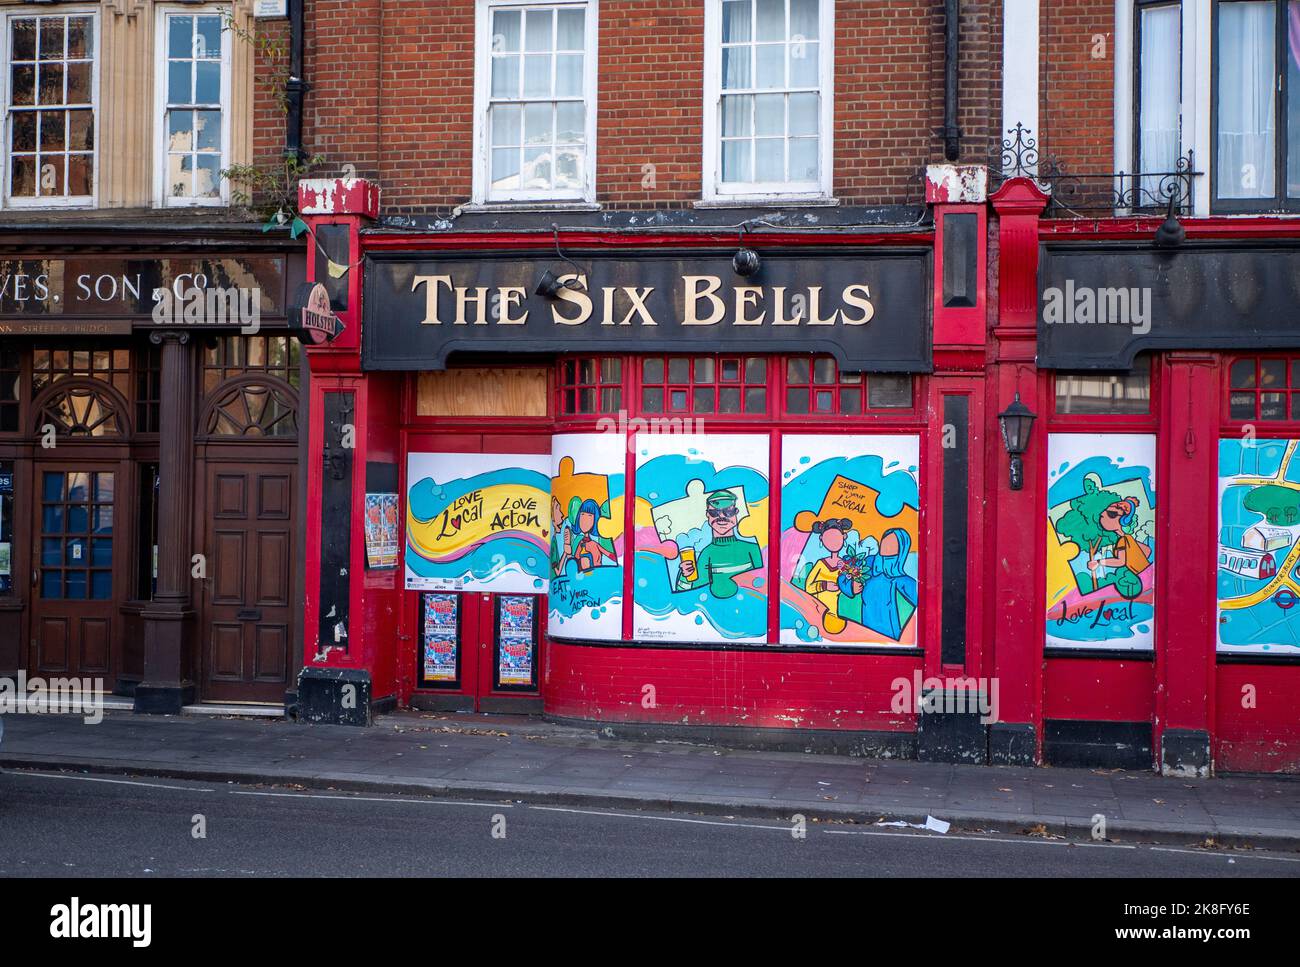 The Six Bells Pub is boarded up in Acton, London. Stock Photo